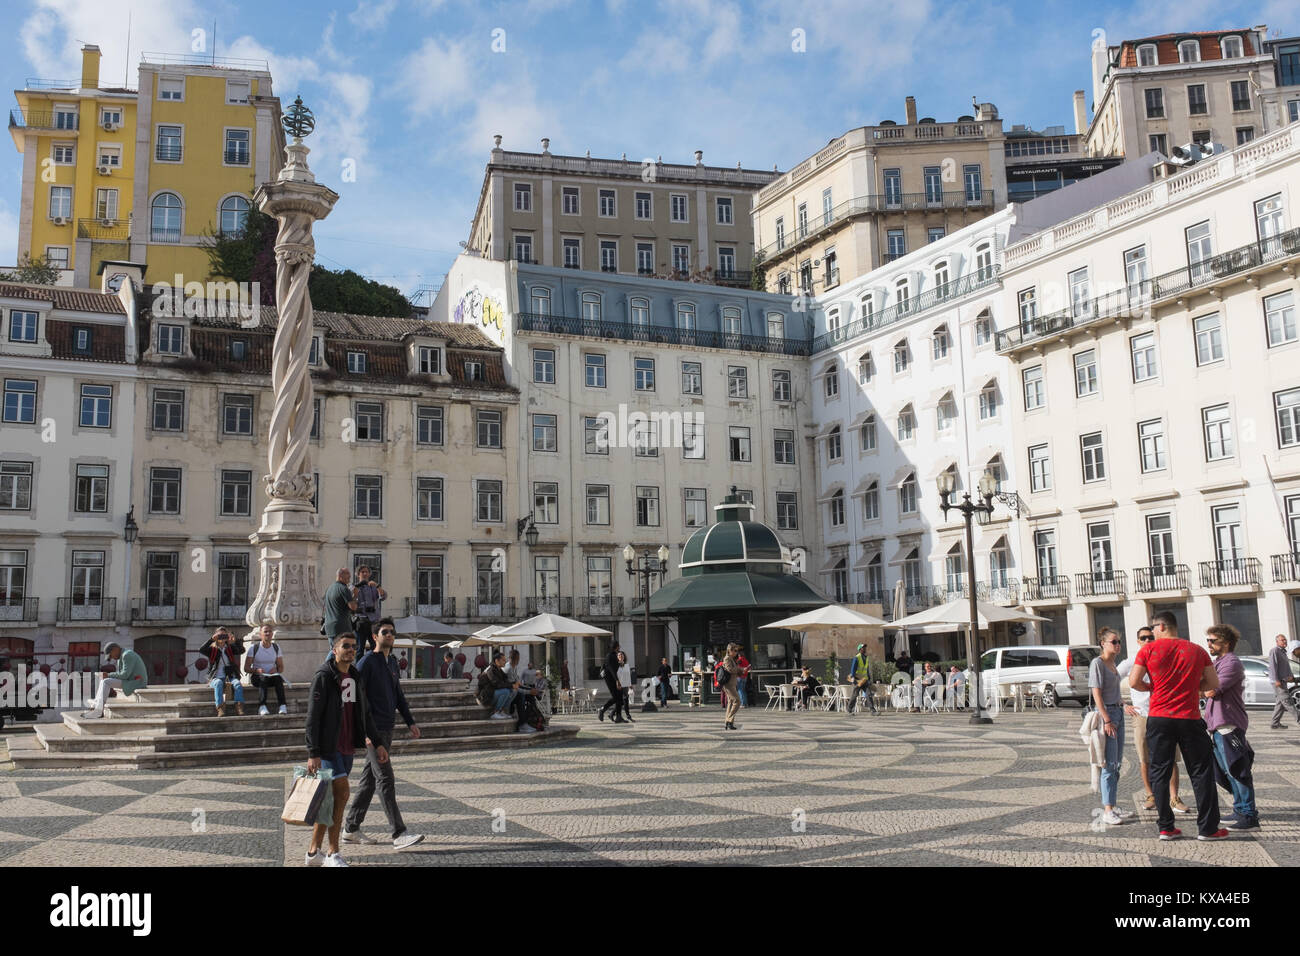 Praca do Municipio or Municipal Square in Lisbon with decorative tiles and tall statue Stock Photo